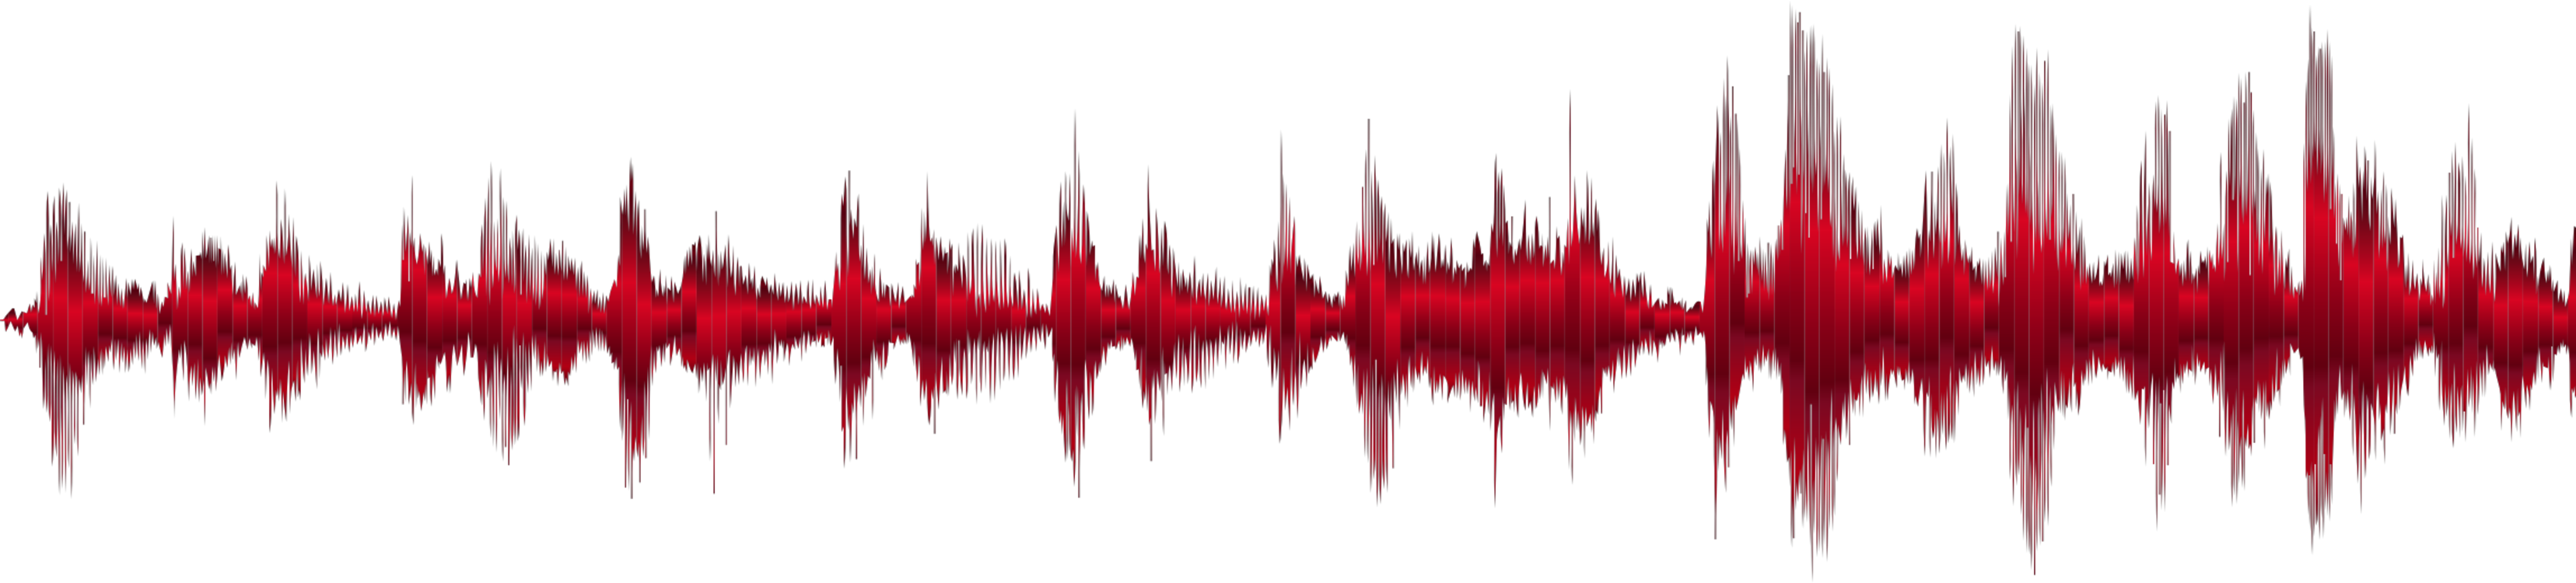 Red,Acoustic Wave,Wave